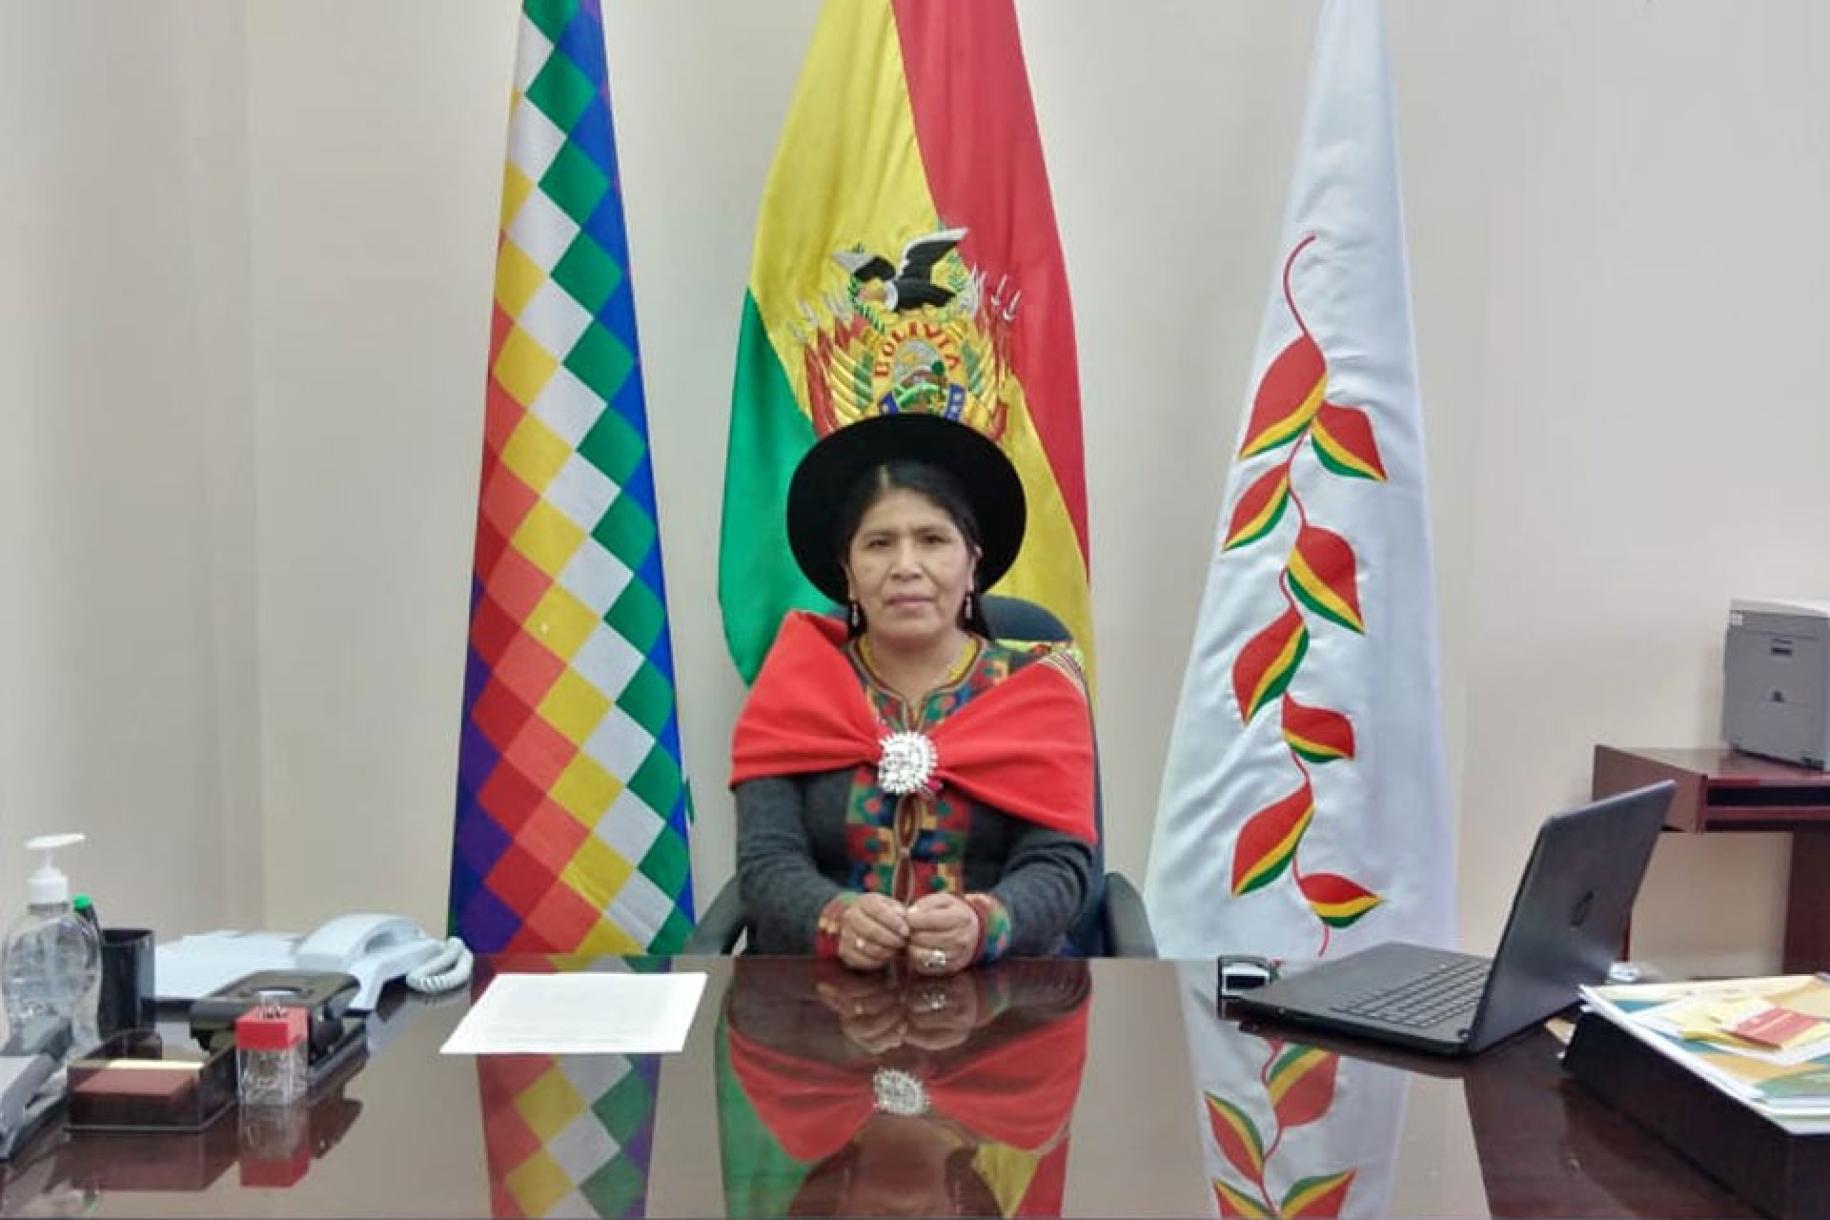 A woman dressed in traditional Bolivian garb in front of three flags. 